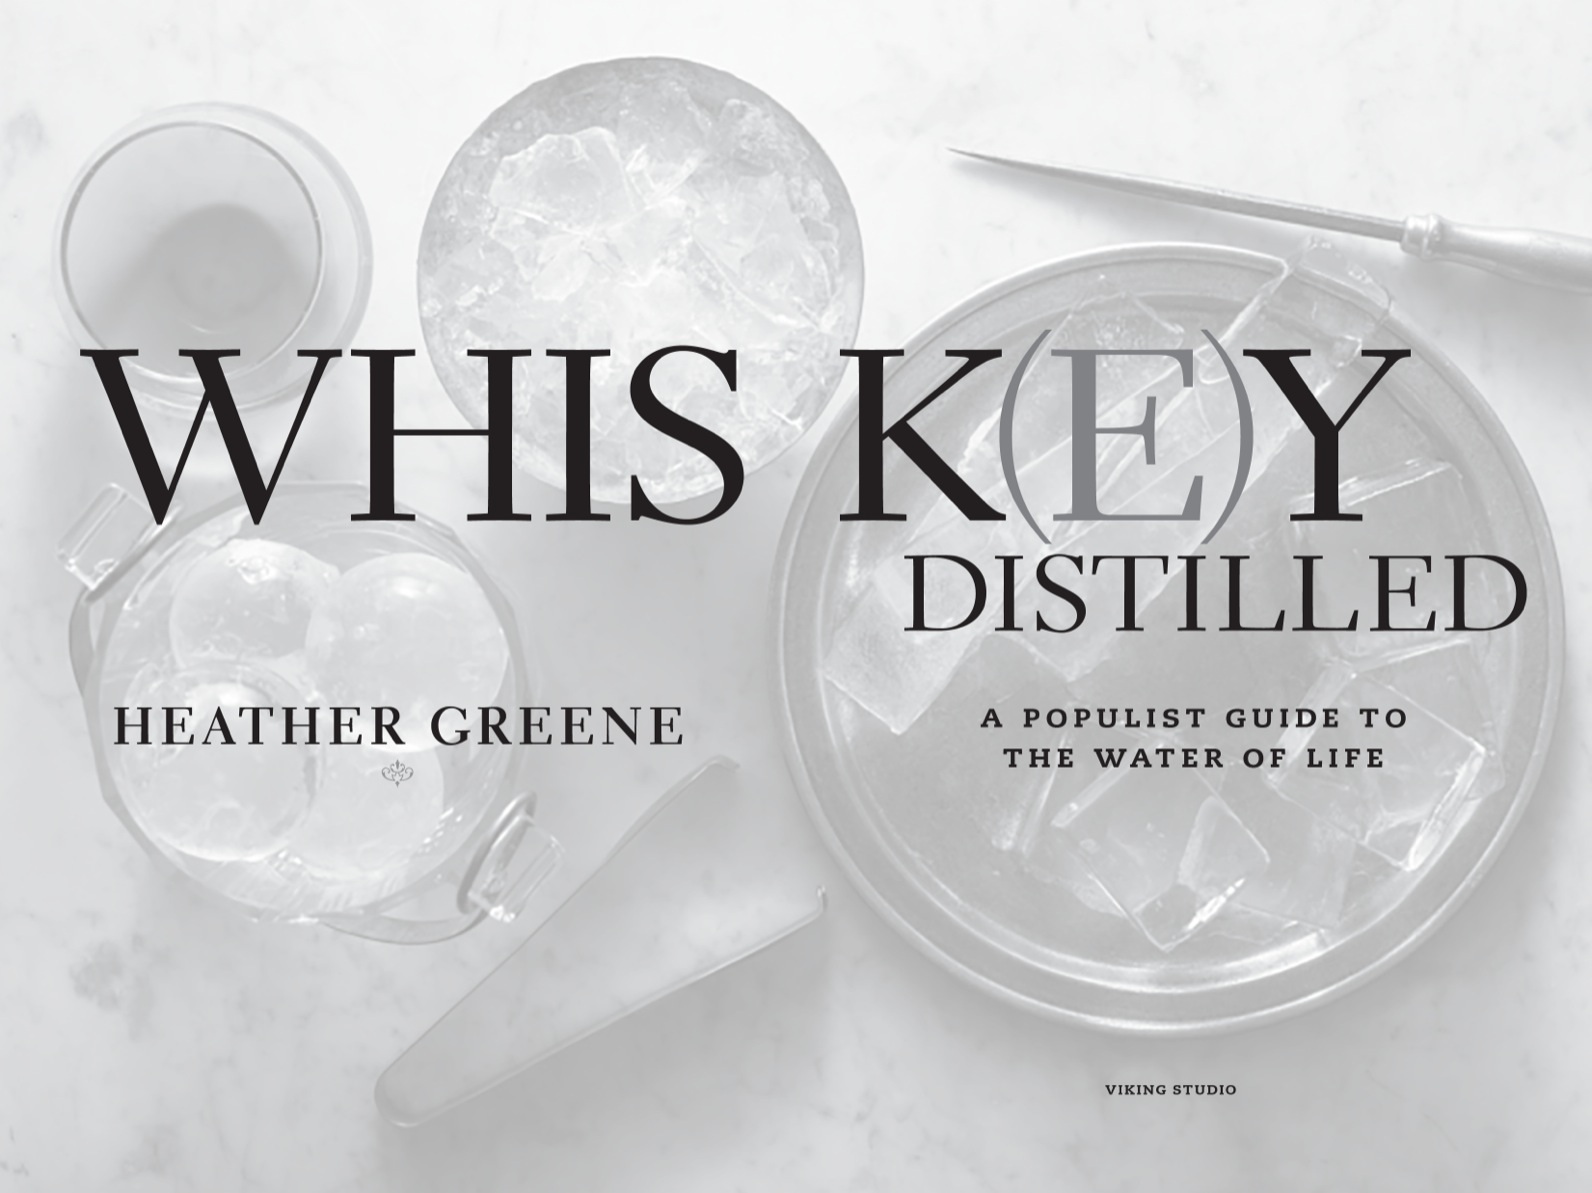 Whiskey Distilled A Populist Guide to the Water of Life - image 3